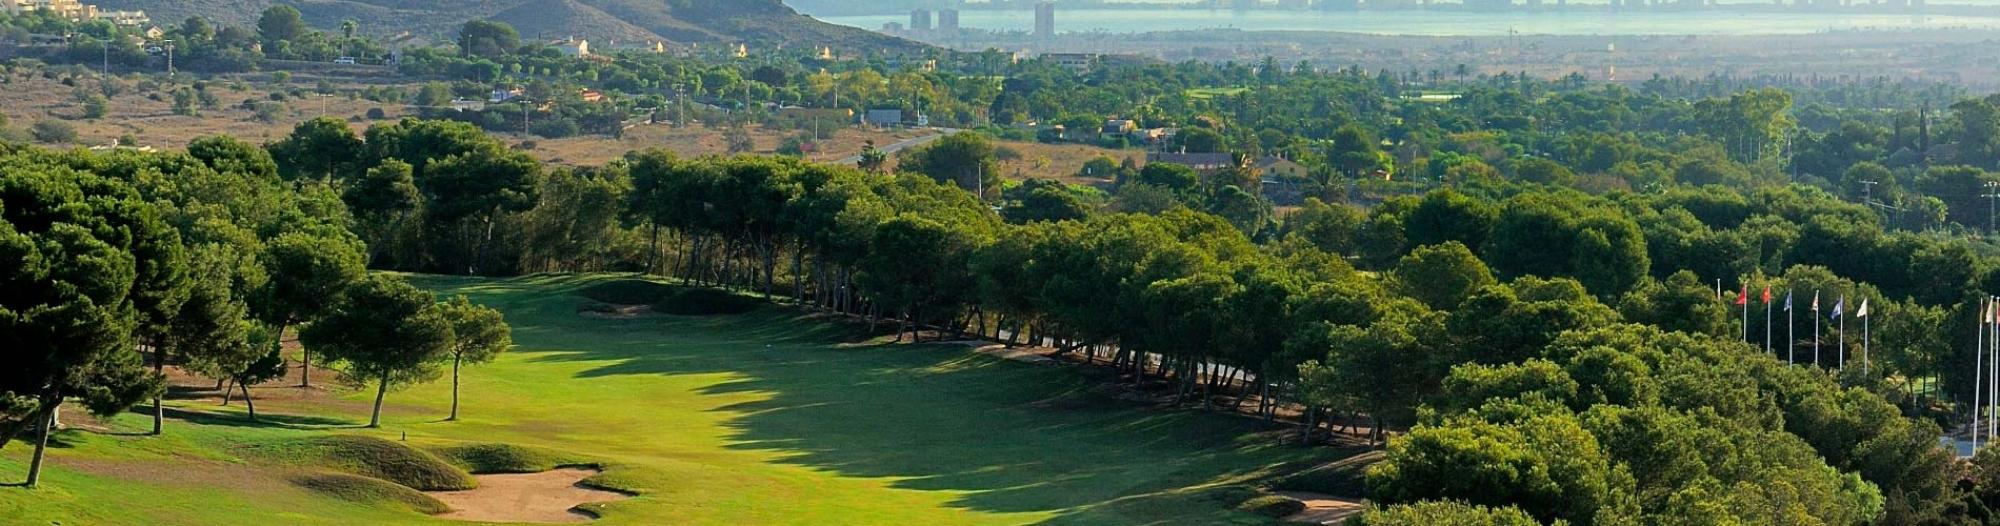 View La Manga Golf Club, West Course's lovely golf course in magnificent Costa Blanca.